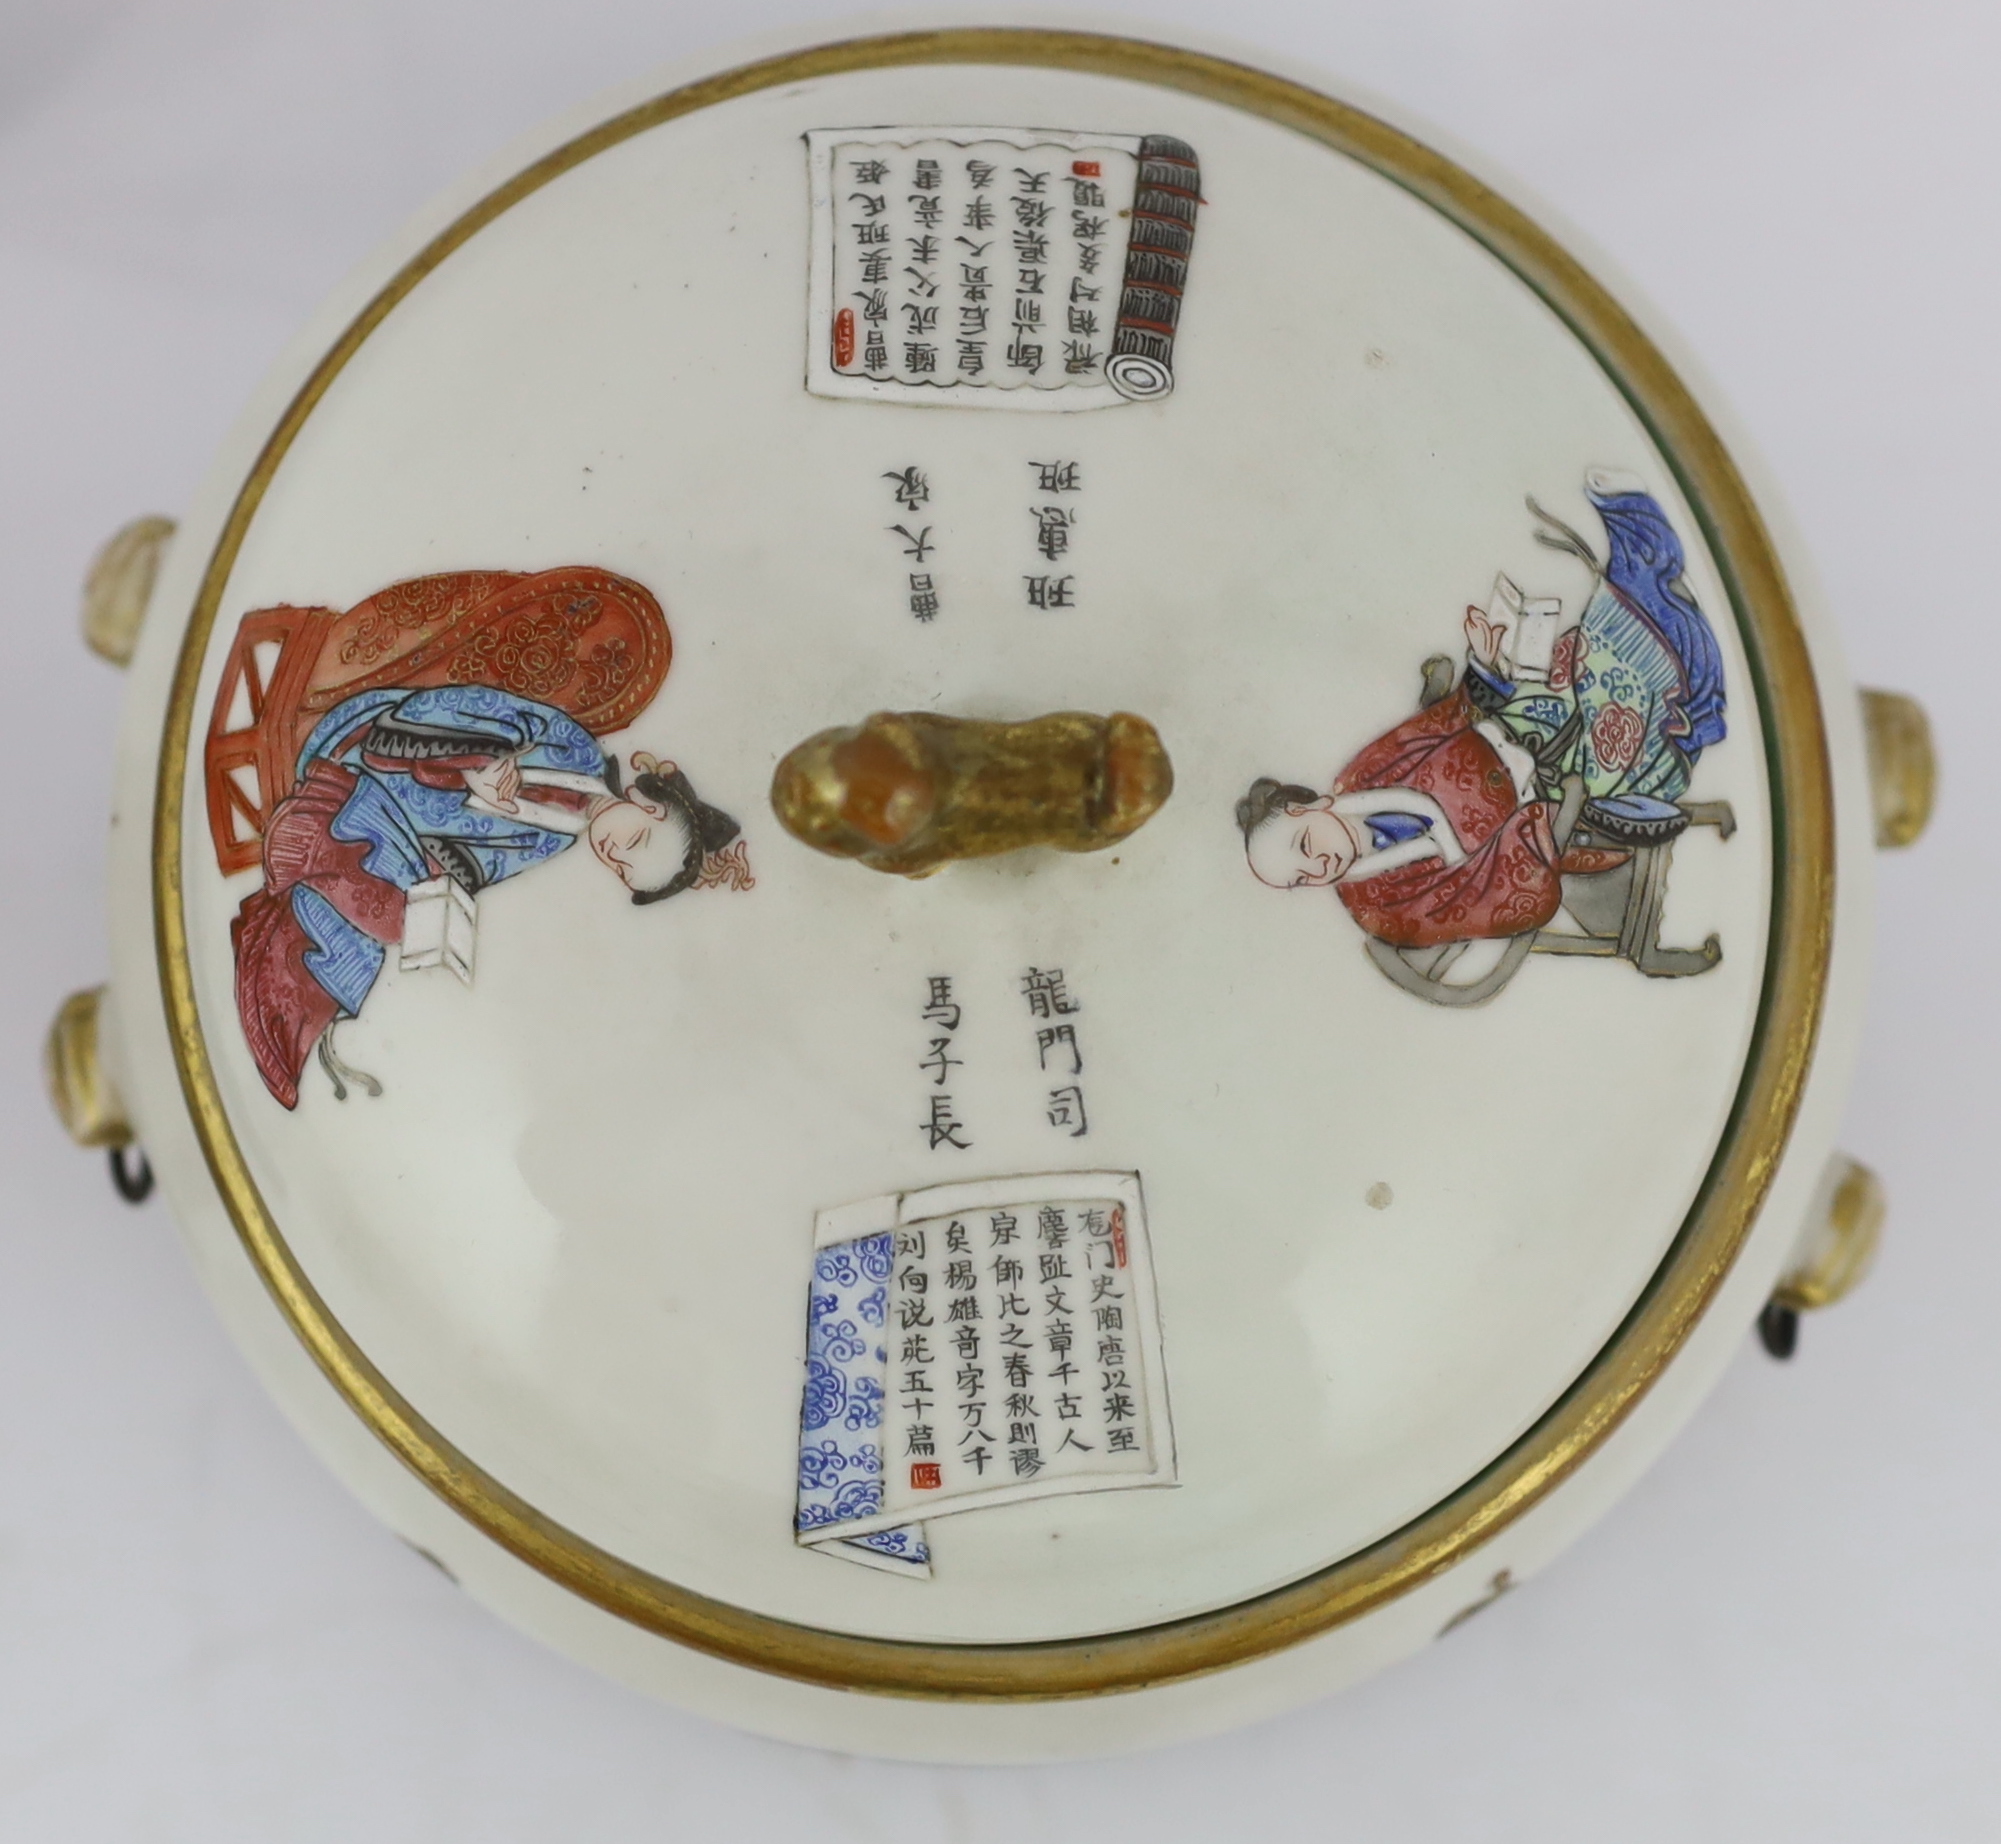 A pair of Chinese famille rose 'Wu Shuang Pu' porridge pots, liners and covers, Daoguang seal marks and of the period (1821-50), star crack to one base